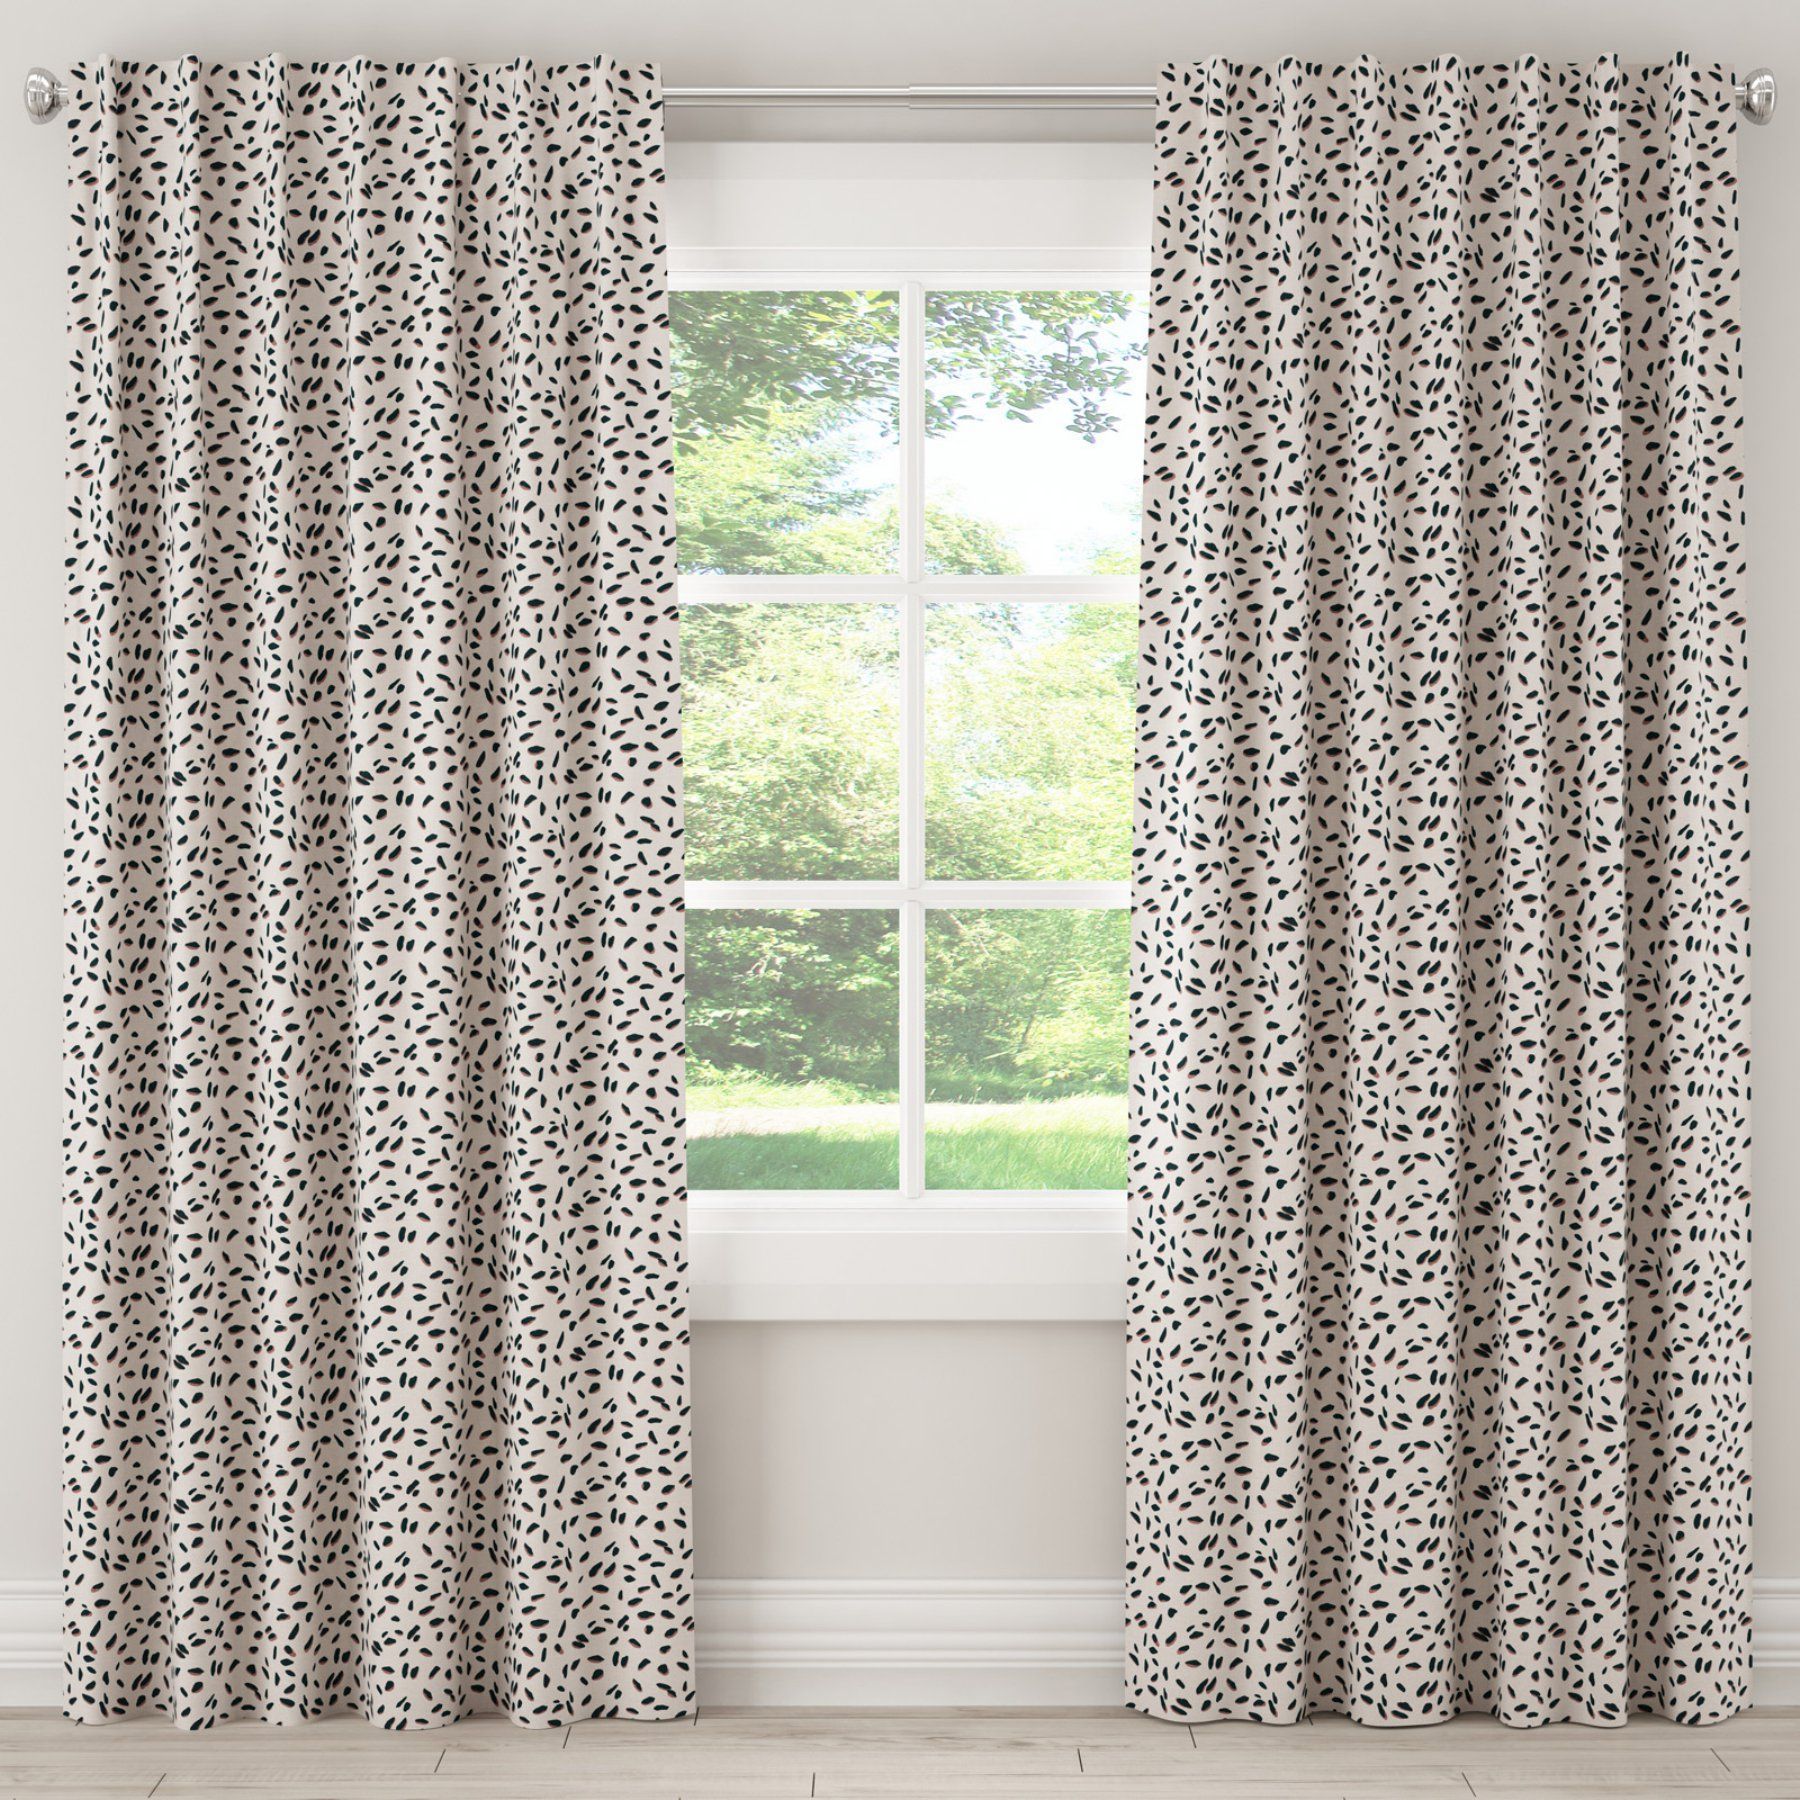 Skyline Neo Leo Blackout Window Curtain Panel | Products In Throughout Cyrus Thermal Blackout Back Tab Curtain Panels (View 10 of 20)